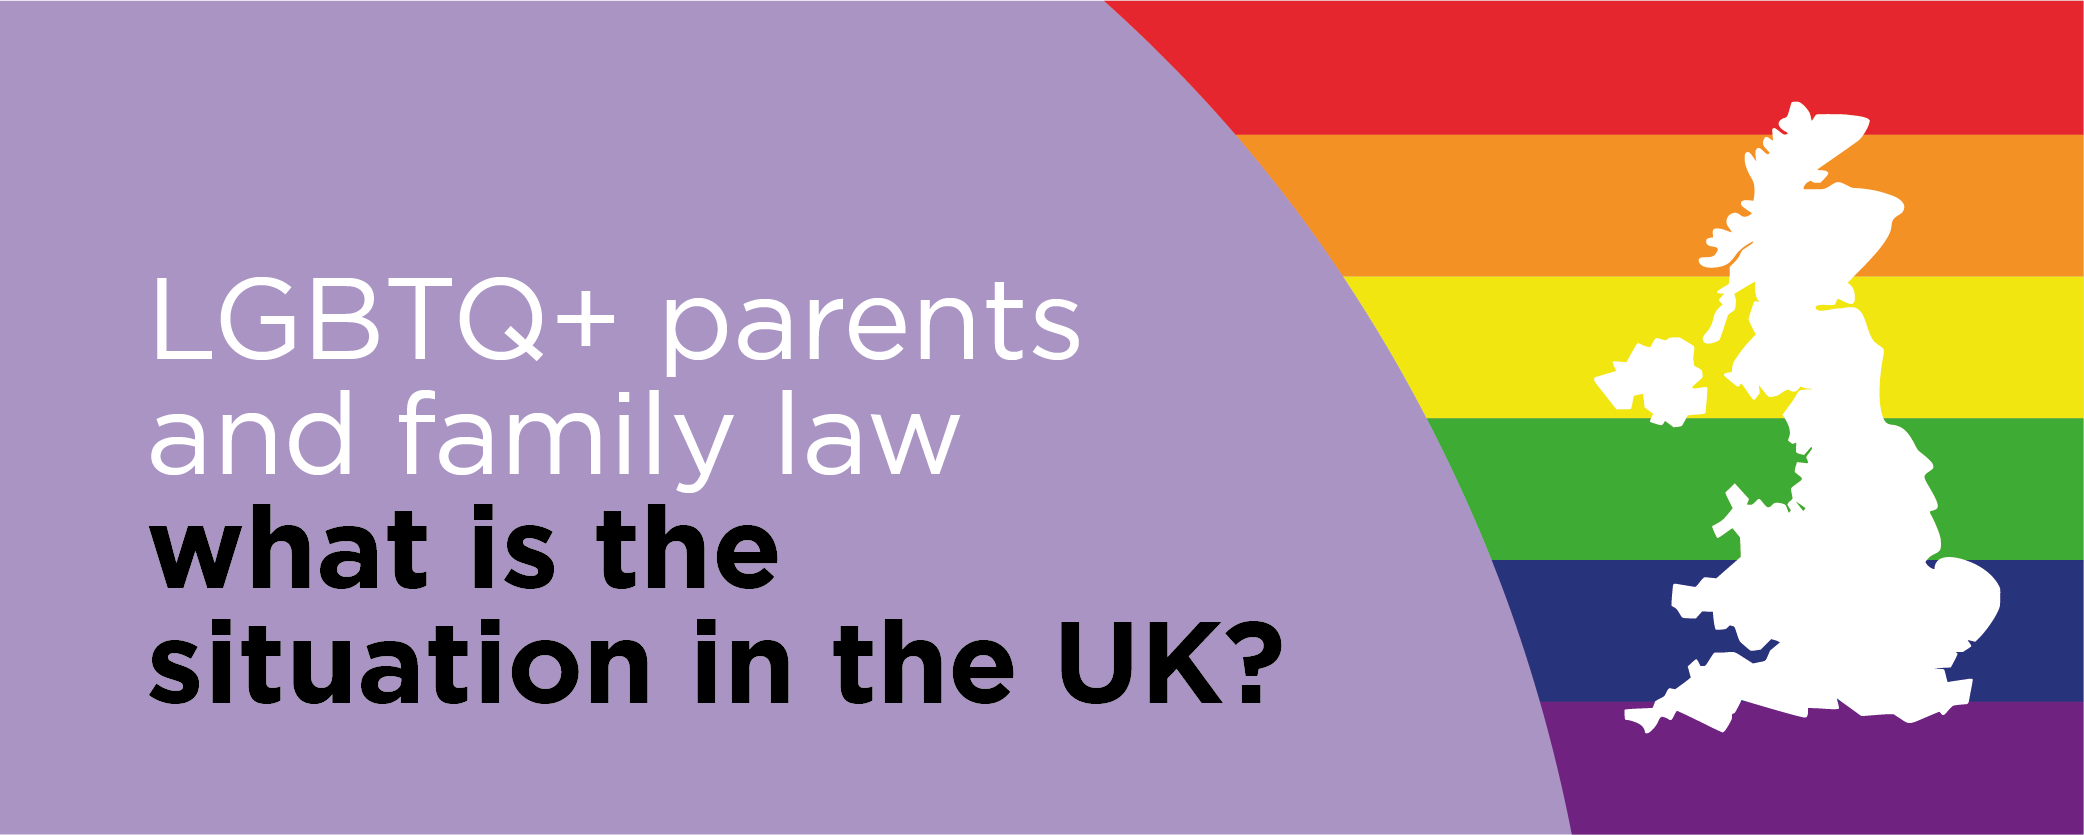 LGBTQ+ parents and family law: what is the situation in the UK?